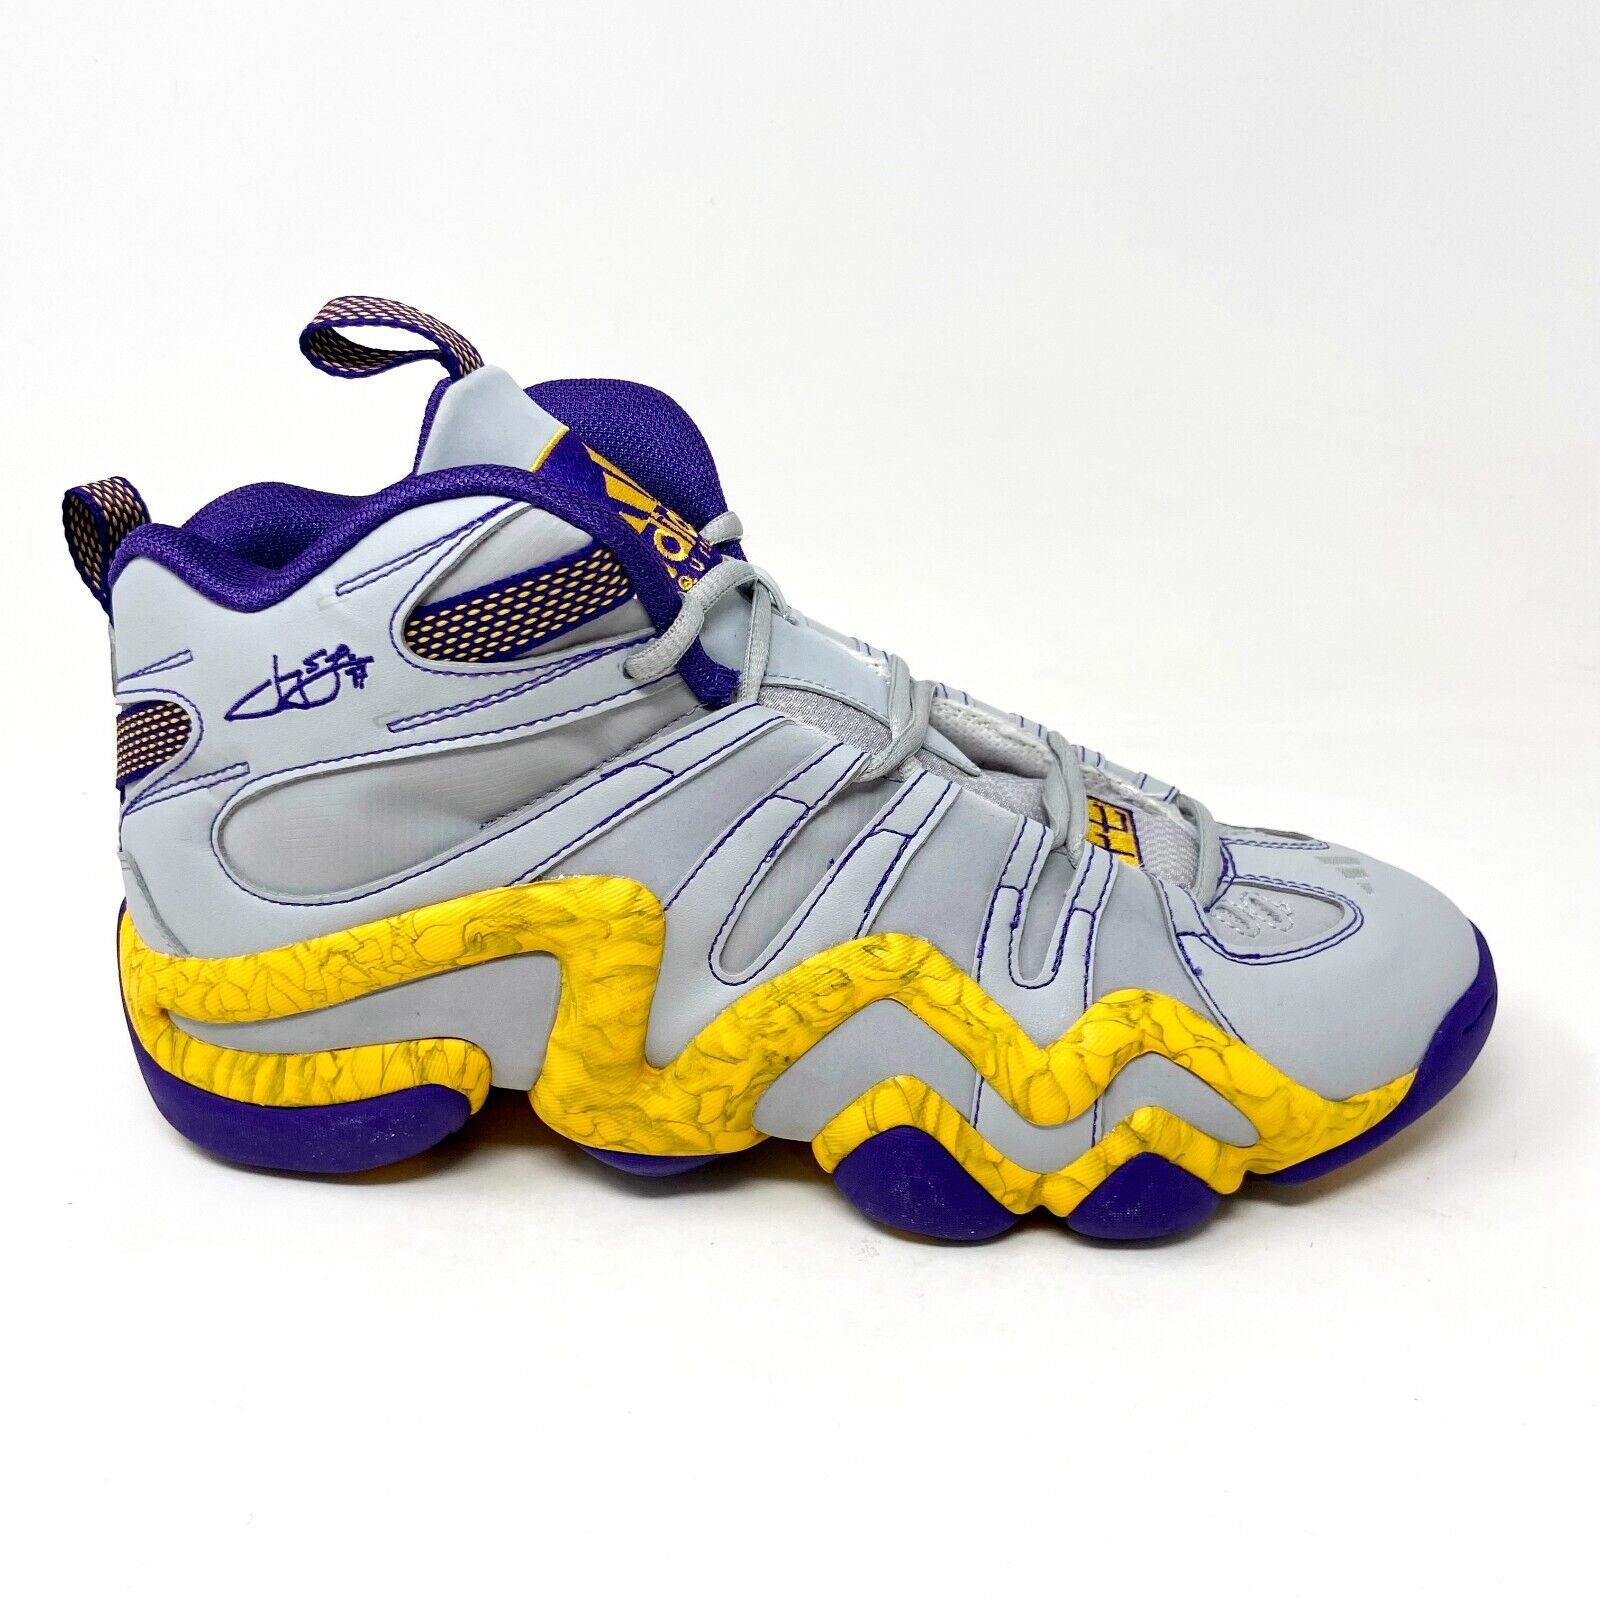 Reebok Question Iverson purple 5.5 suede basketball shoes sneakers